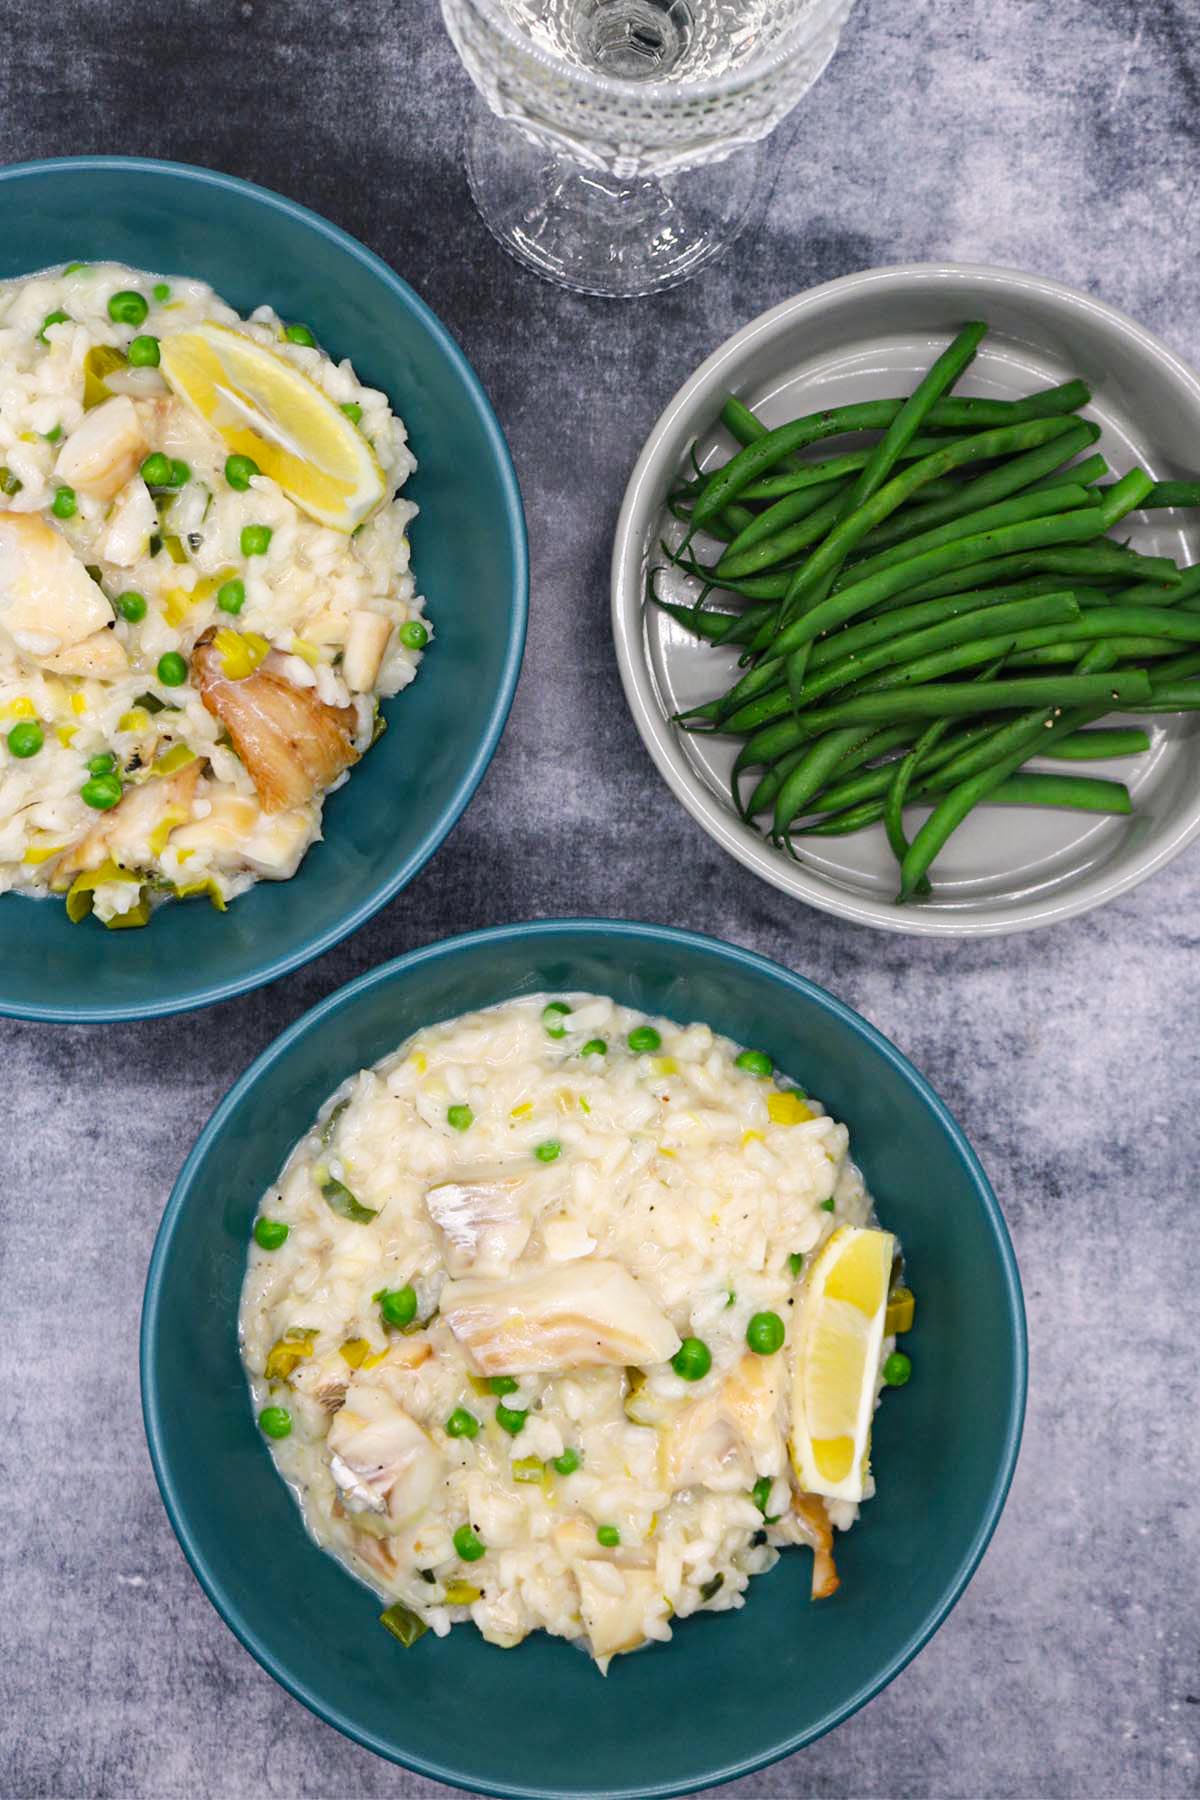 Smoked haddock risotto in a green bowls with wedge of lemon next to bowl of green beans and glass of white wine